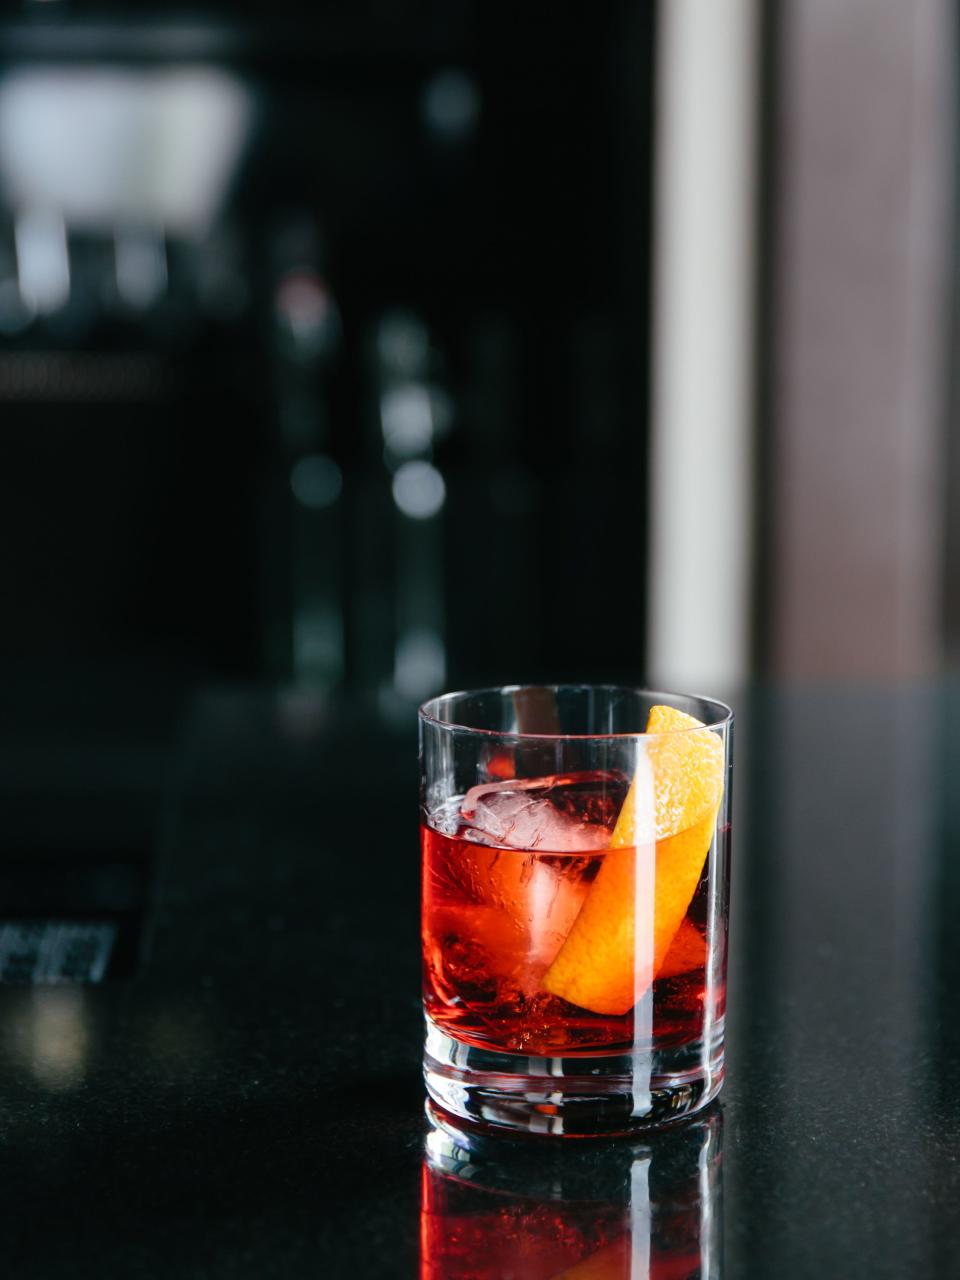 10 Campari Cocktails for Your Afternoon Aperitivo